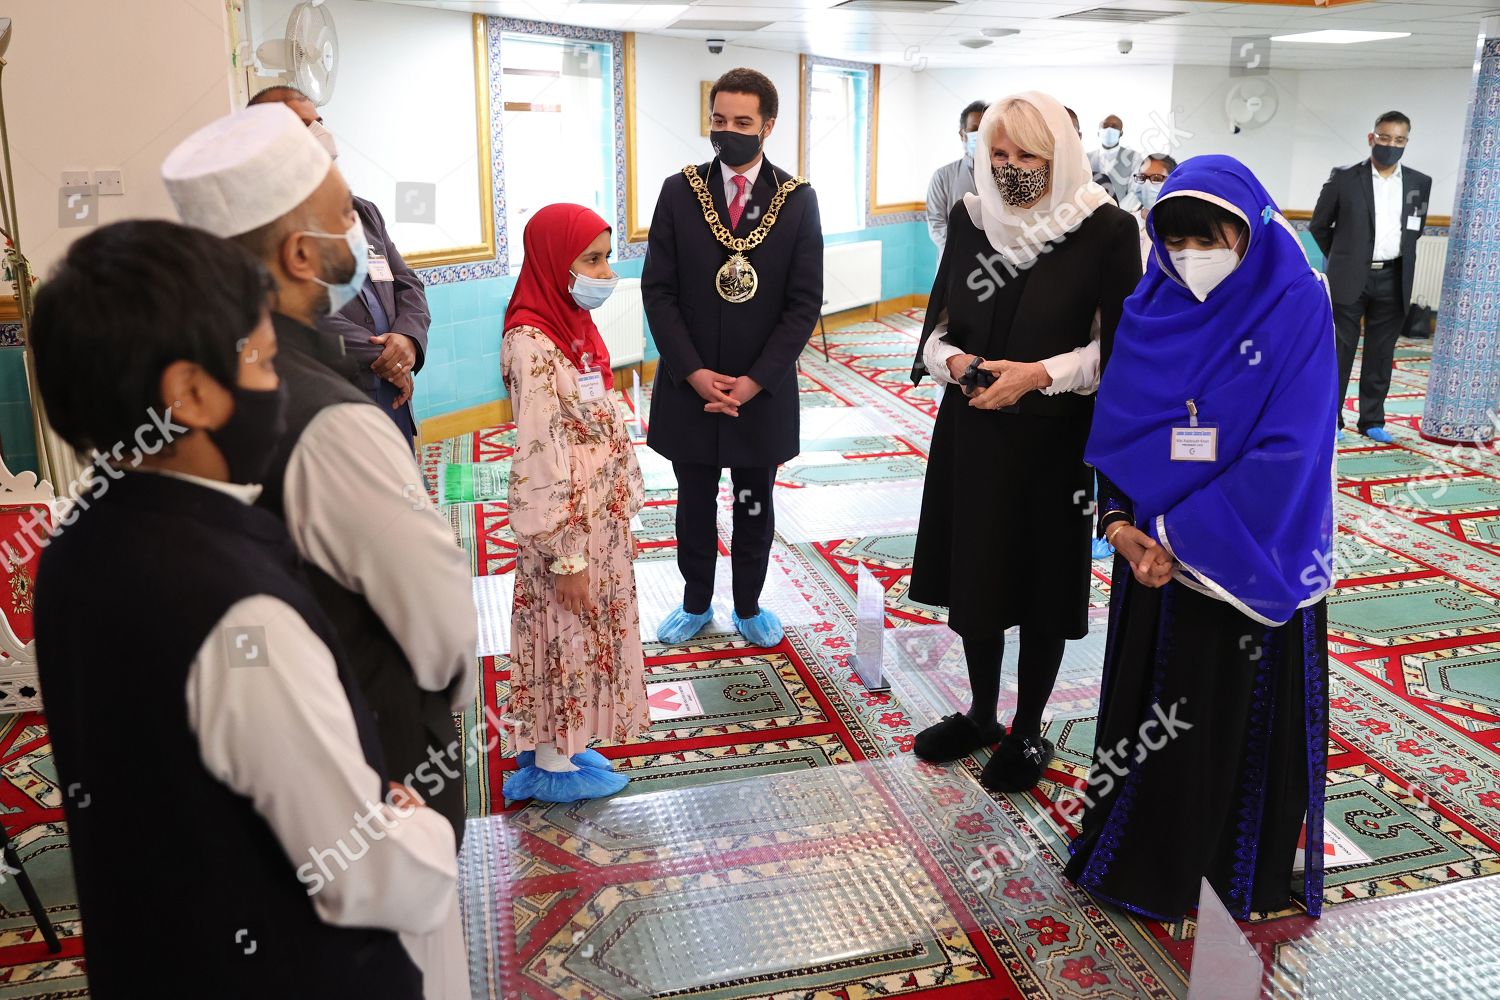 CASA REAL BRITÁNICA - Página 52 Camilla-duchess-of-cornwall-visit-to-wightman-road-mosque-london-uk-shutterstock-editorial-11847770ae